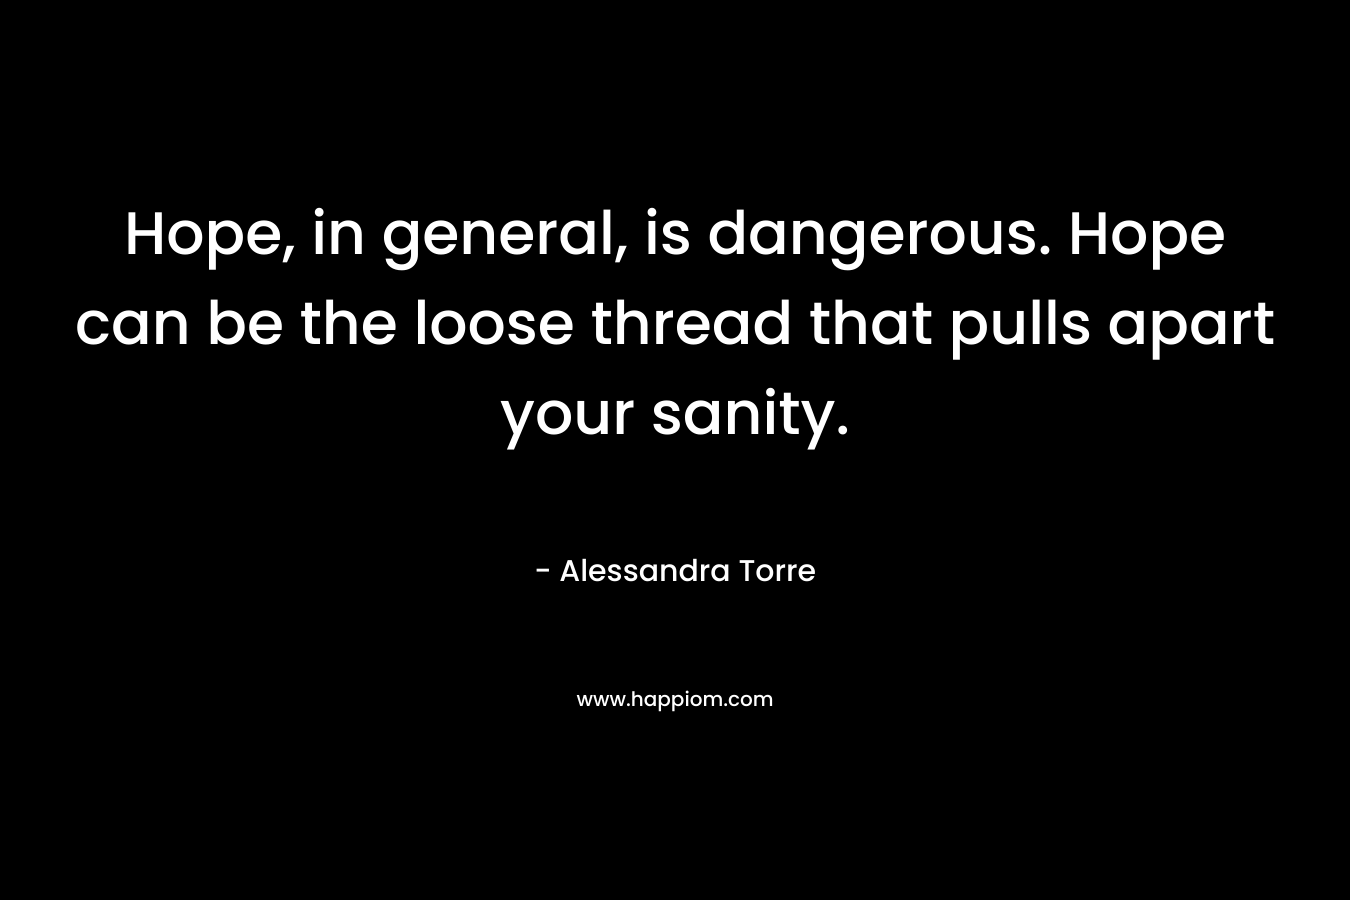 Hope, in general, is dangerous. Hope can be the loose thread that pulls apart your sanity. – Alessandra Torre